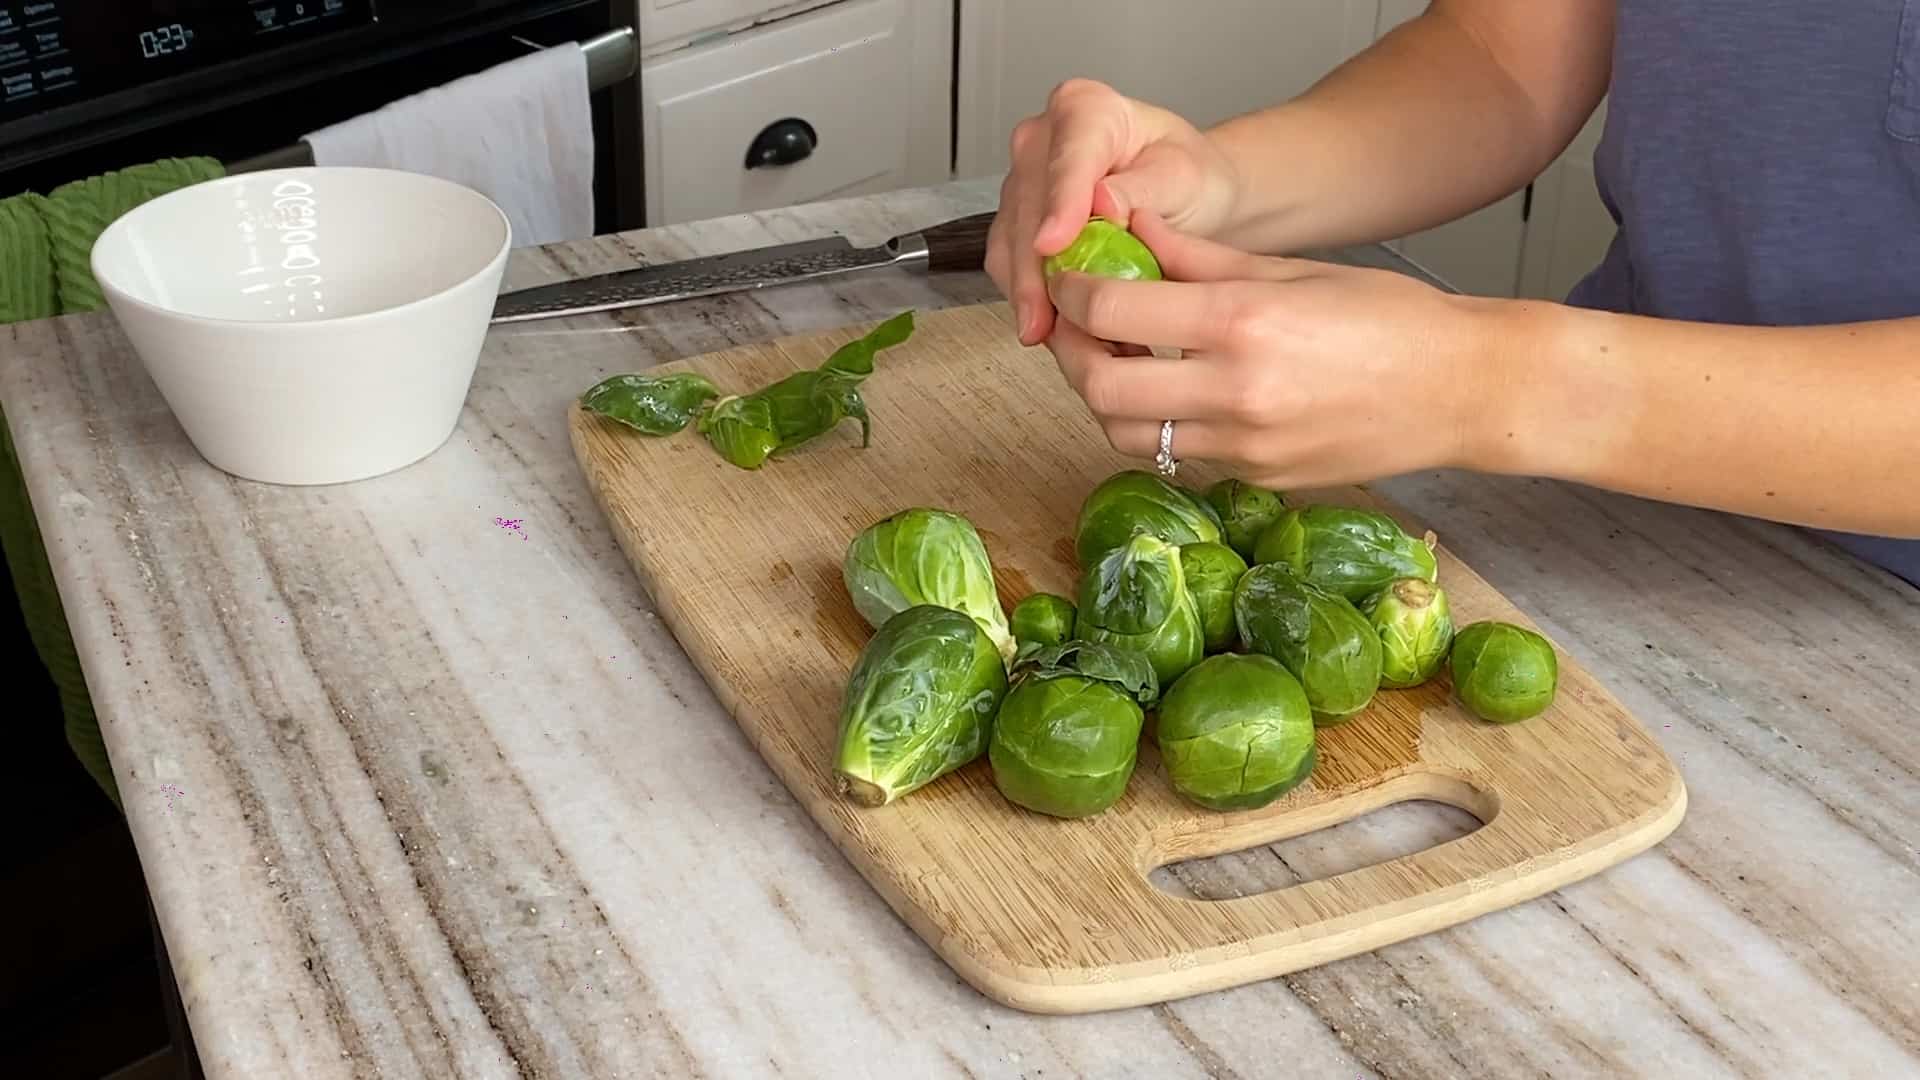 woman's hands holding a Brussels sprout and peeling off leaves